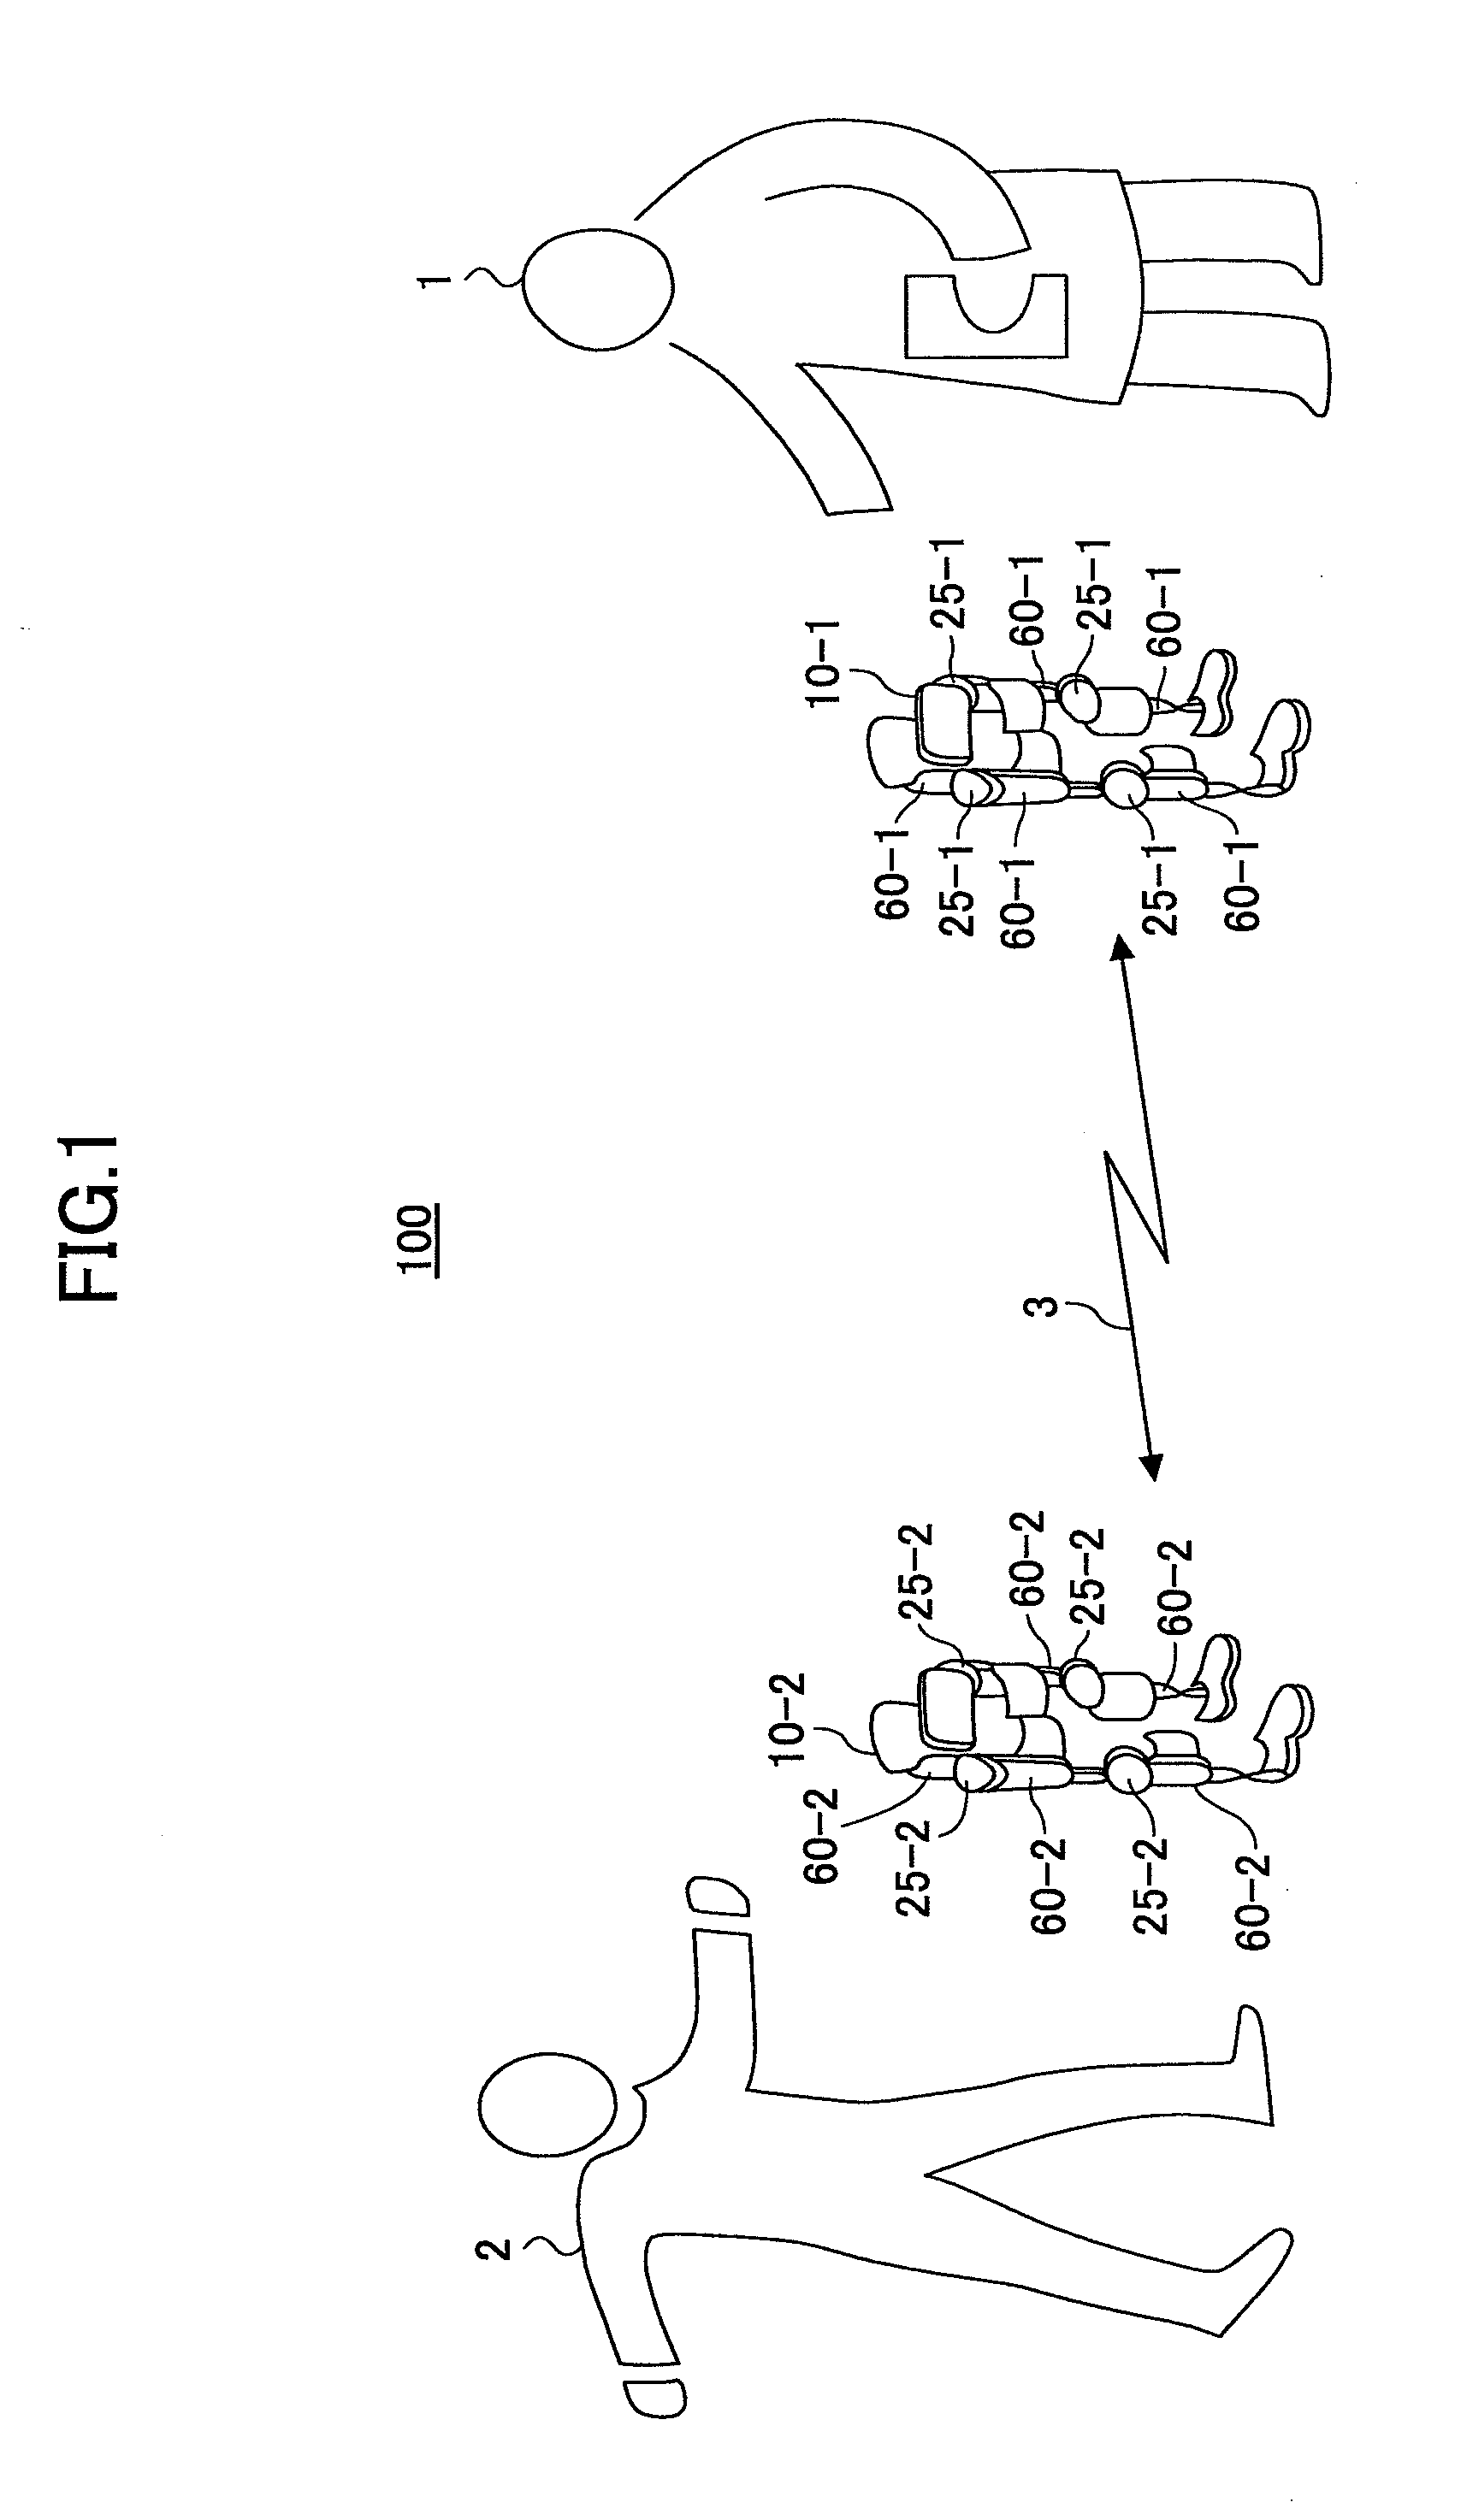 Motion-assist system of wearable motion-assist device, wearable motion-assist device, and motion-assist method of wearable motion-assist device